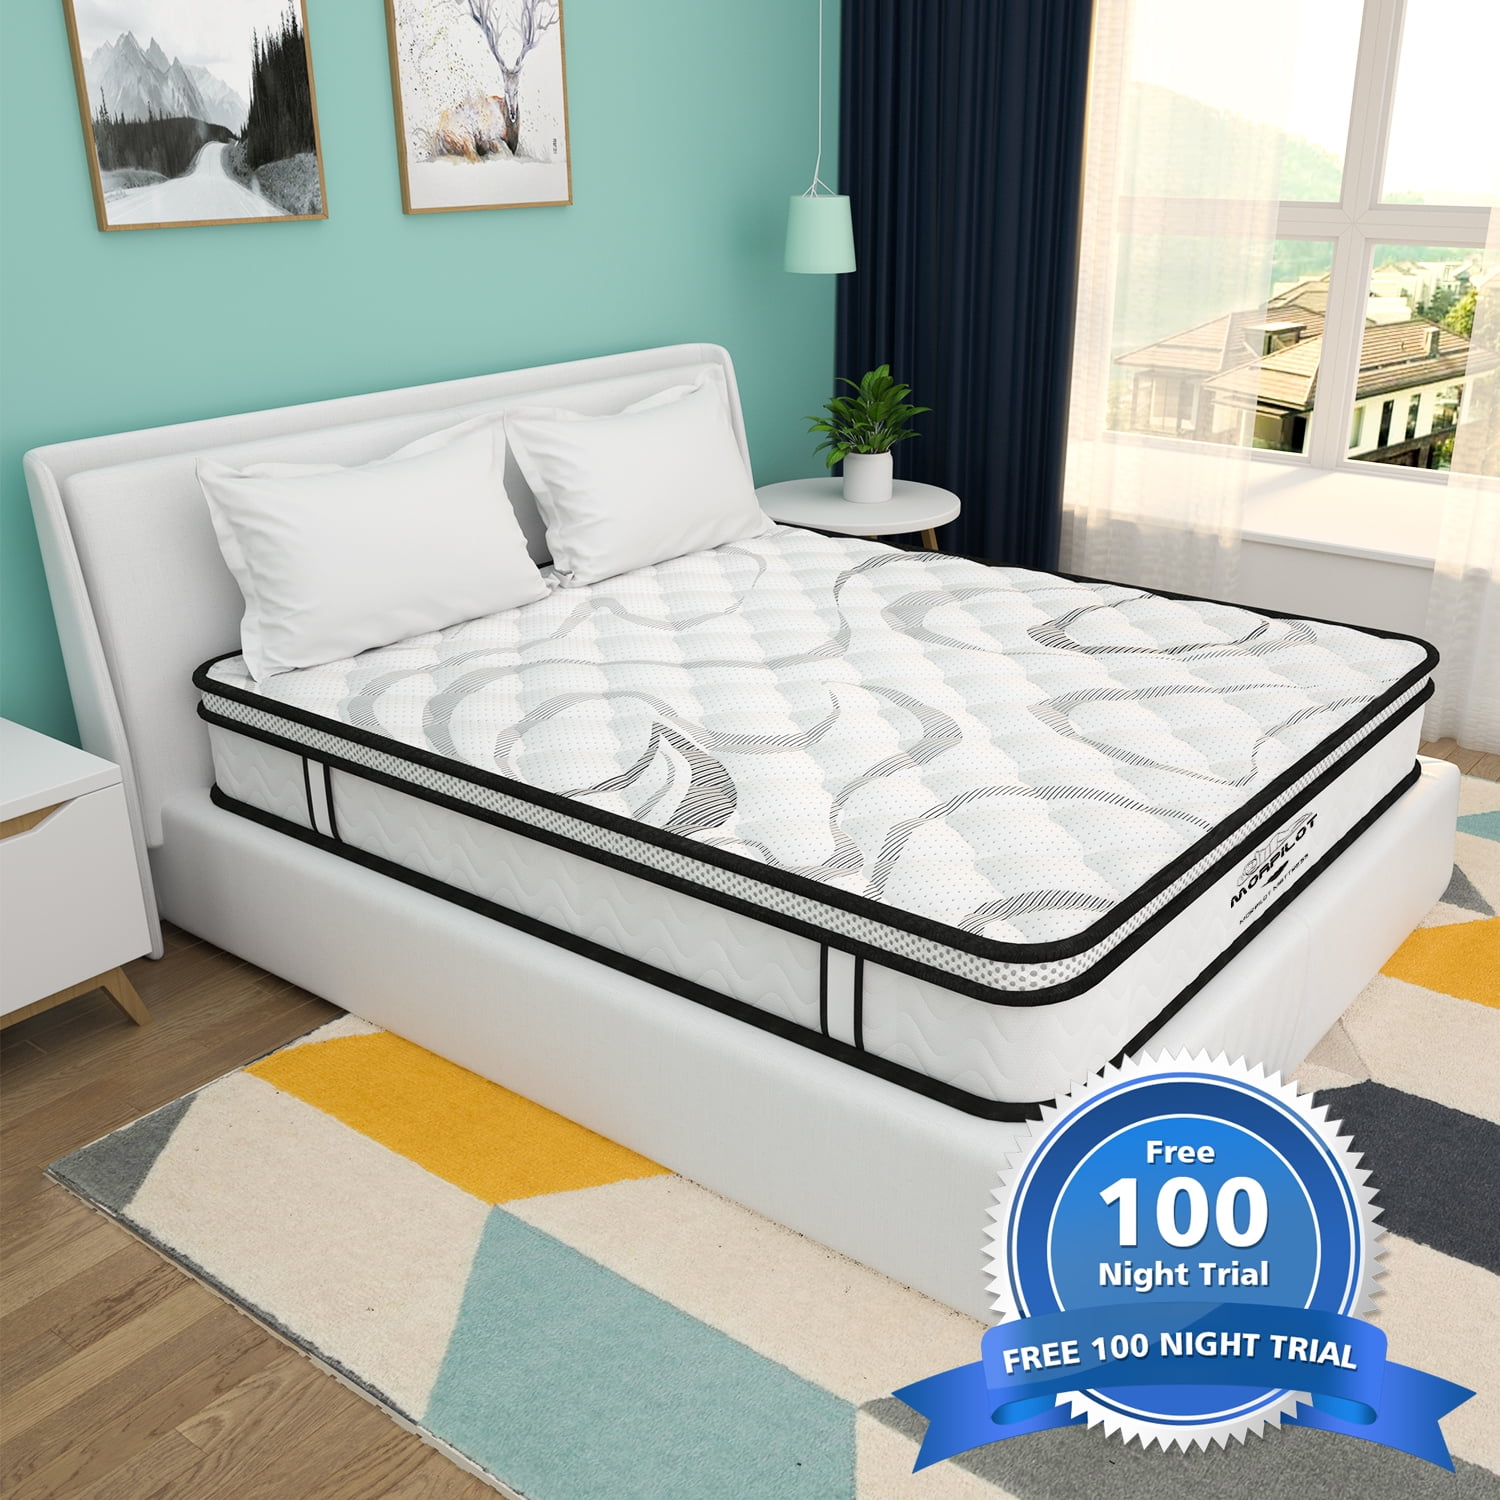 [Free Trial]Morpilot 10 inch Memory Foam and Spring Hybrid Mattress in a Box, Breathable Bed Mattress with CertiPUR-US Certified Foam for Pressure Relief, 10 Year Warranty